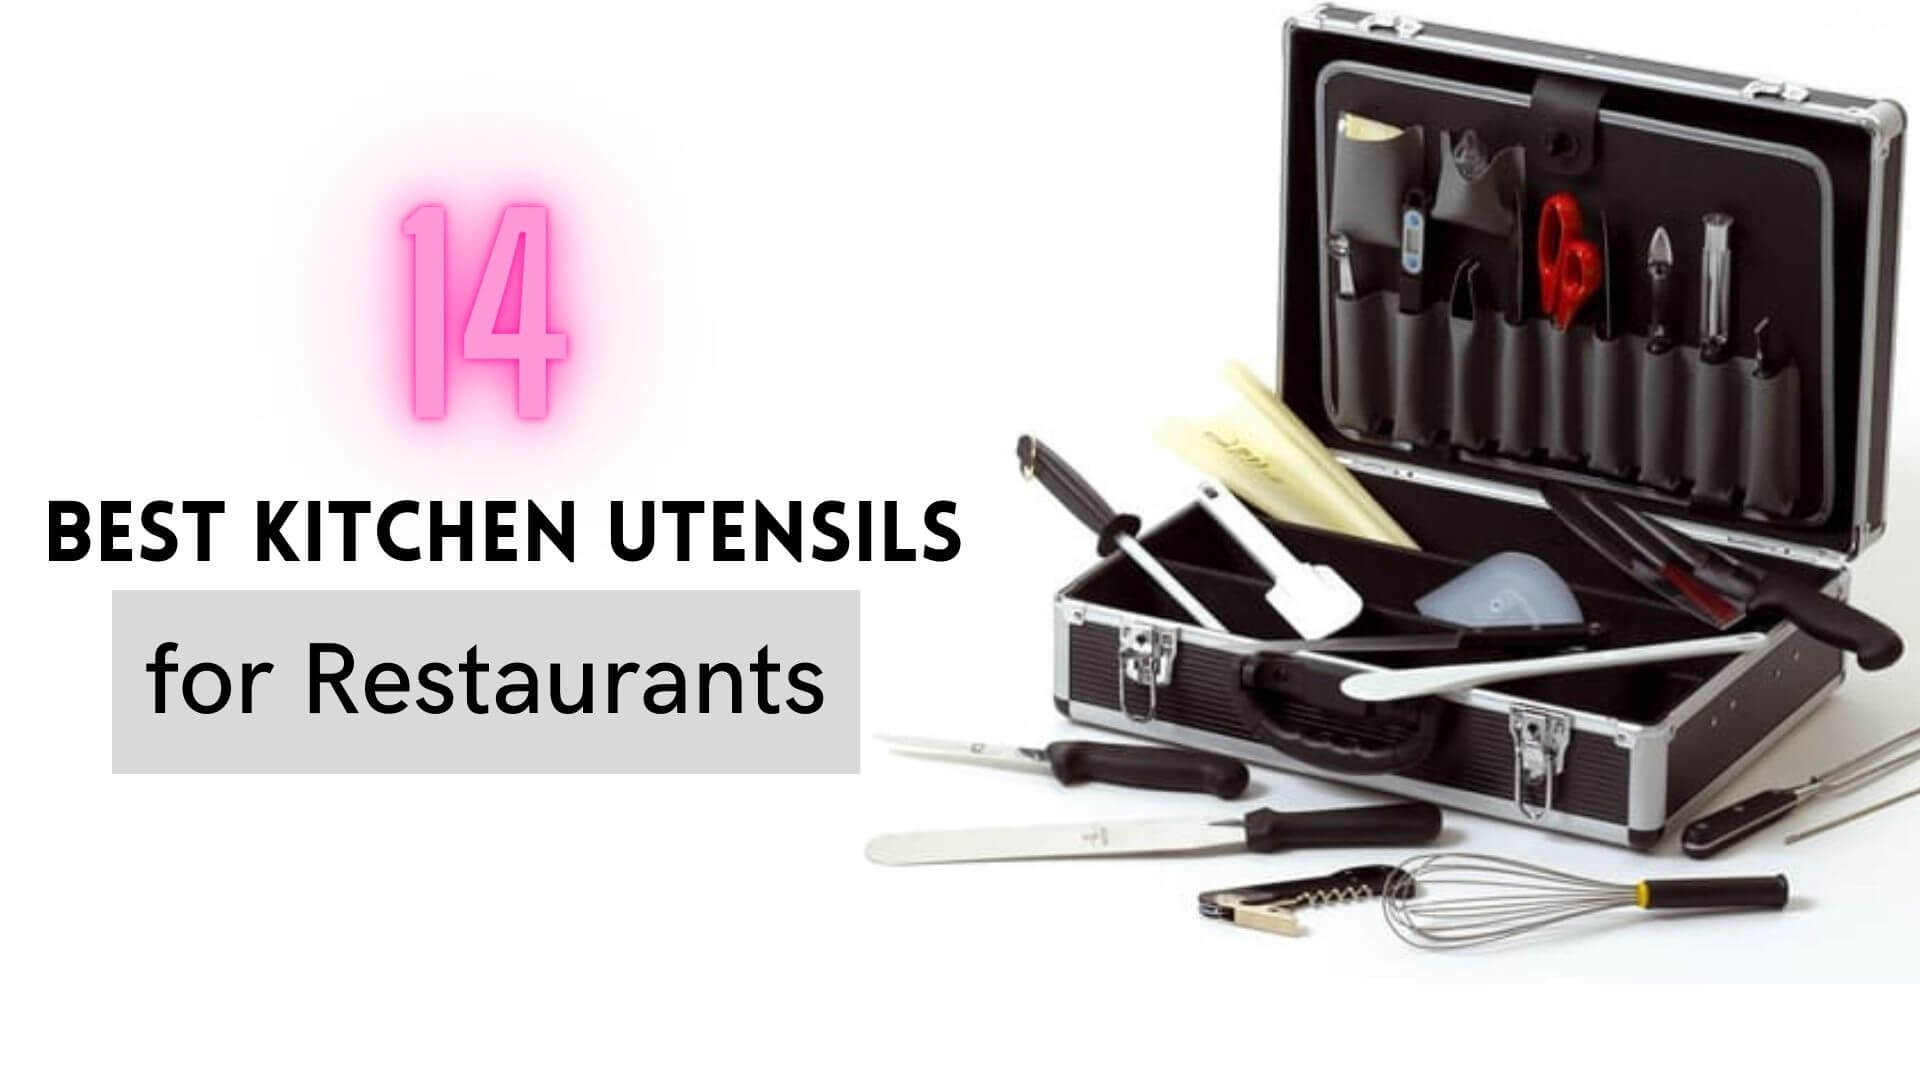 7 Top Pastry Chef Tools and Equipment 